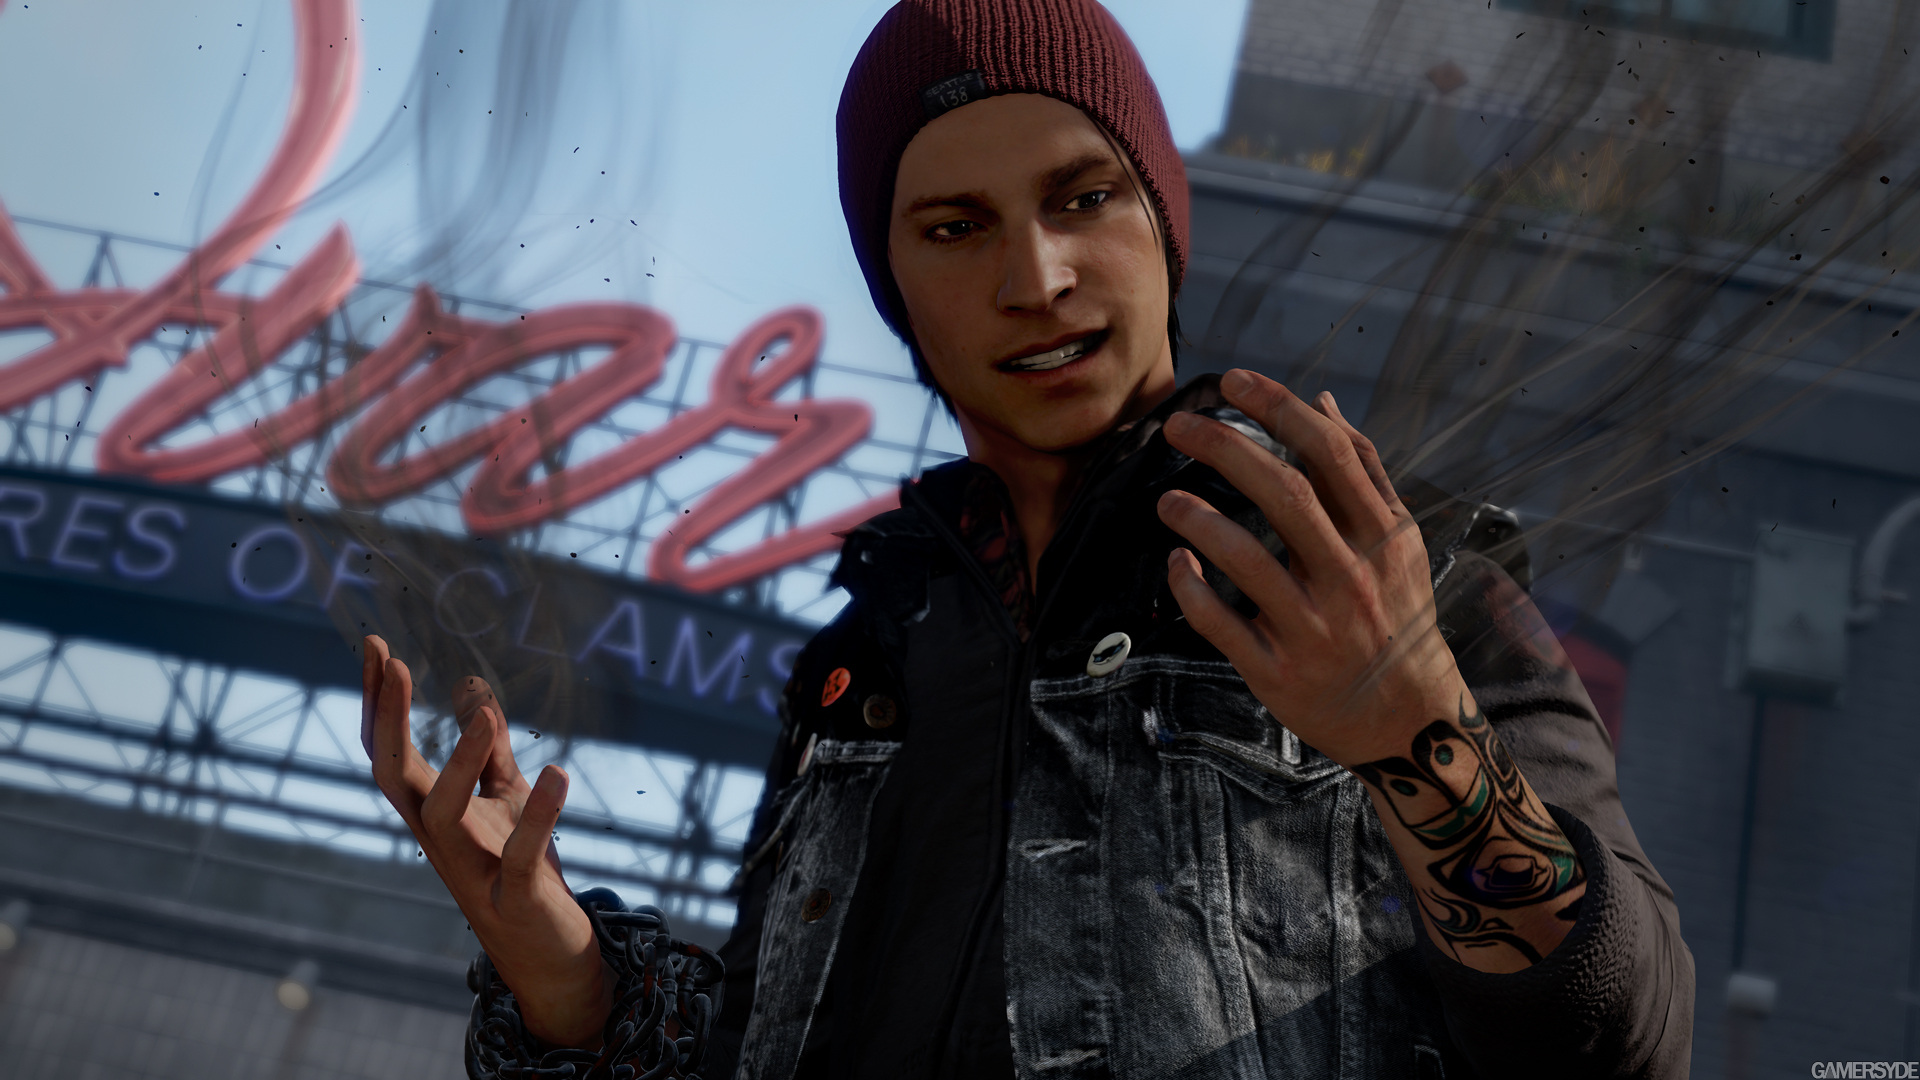 image_infamous_second_son-22142-2661_0003.jpg